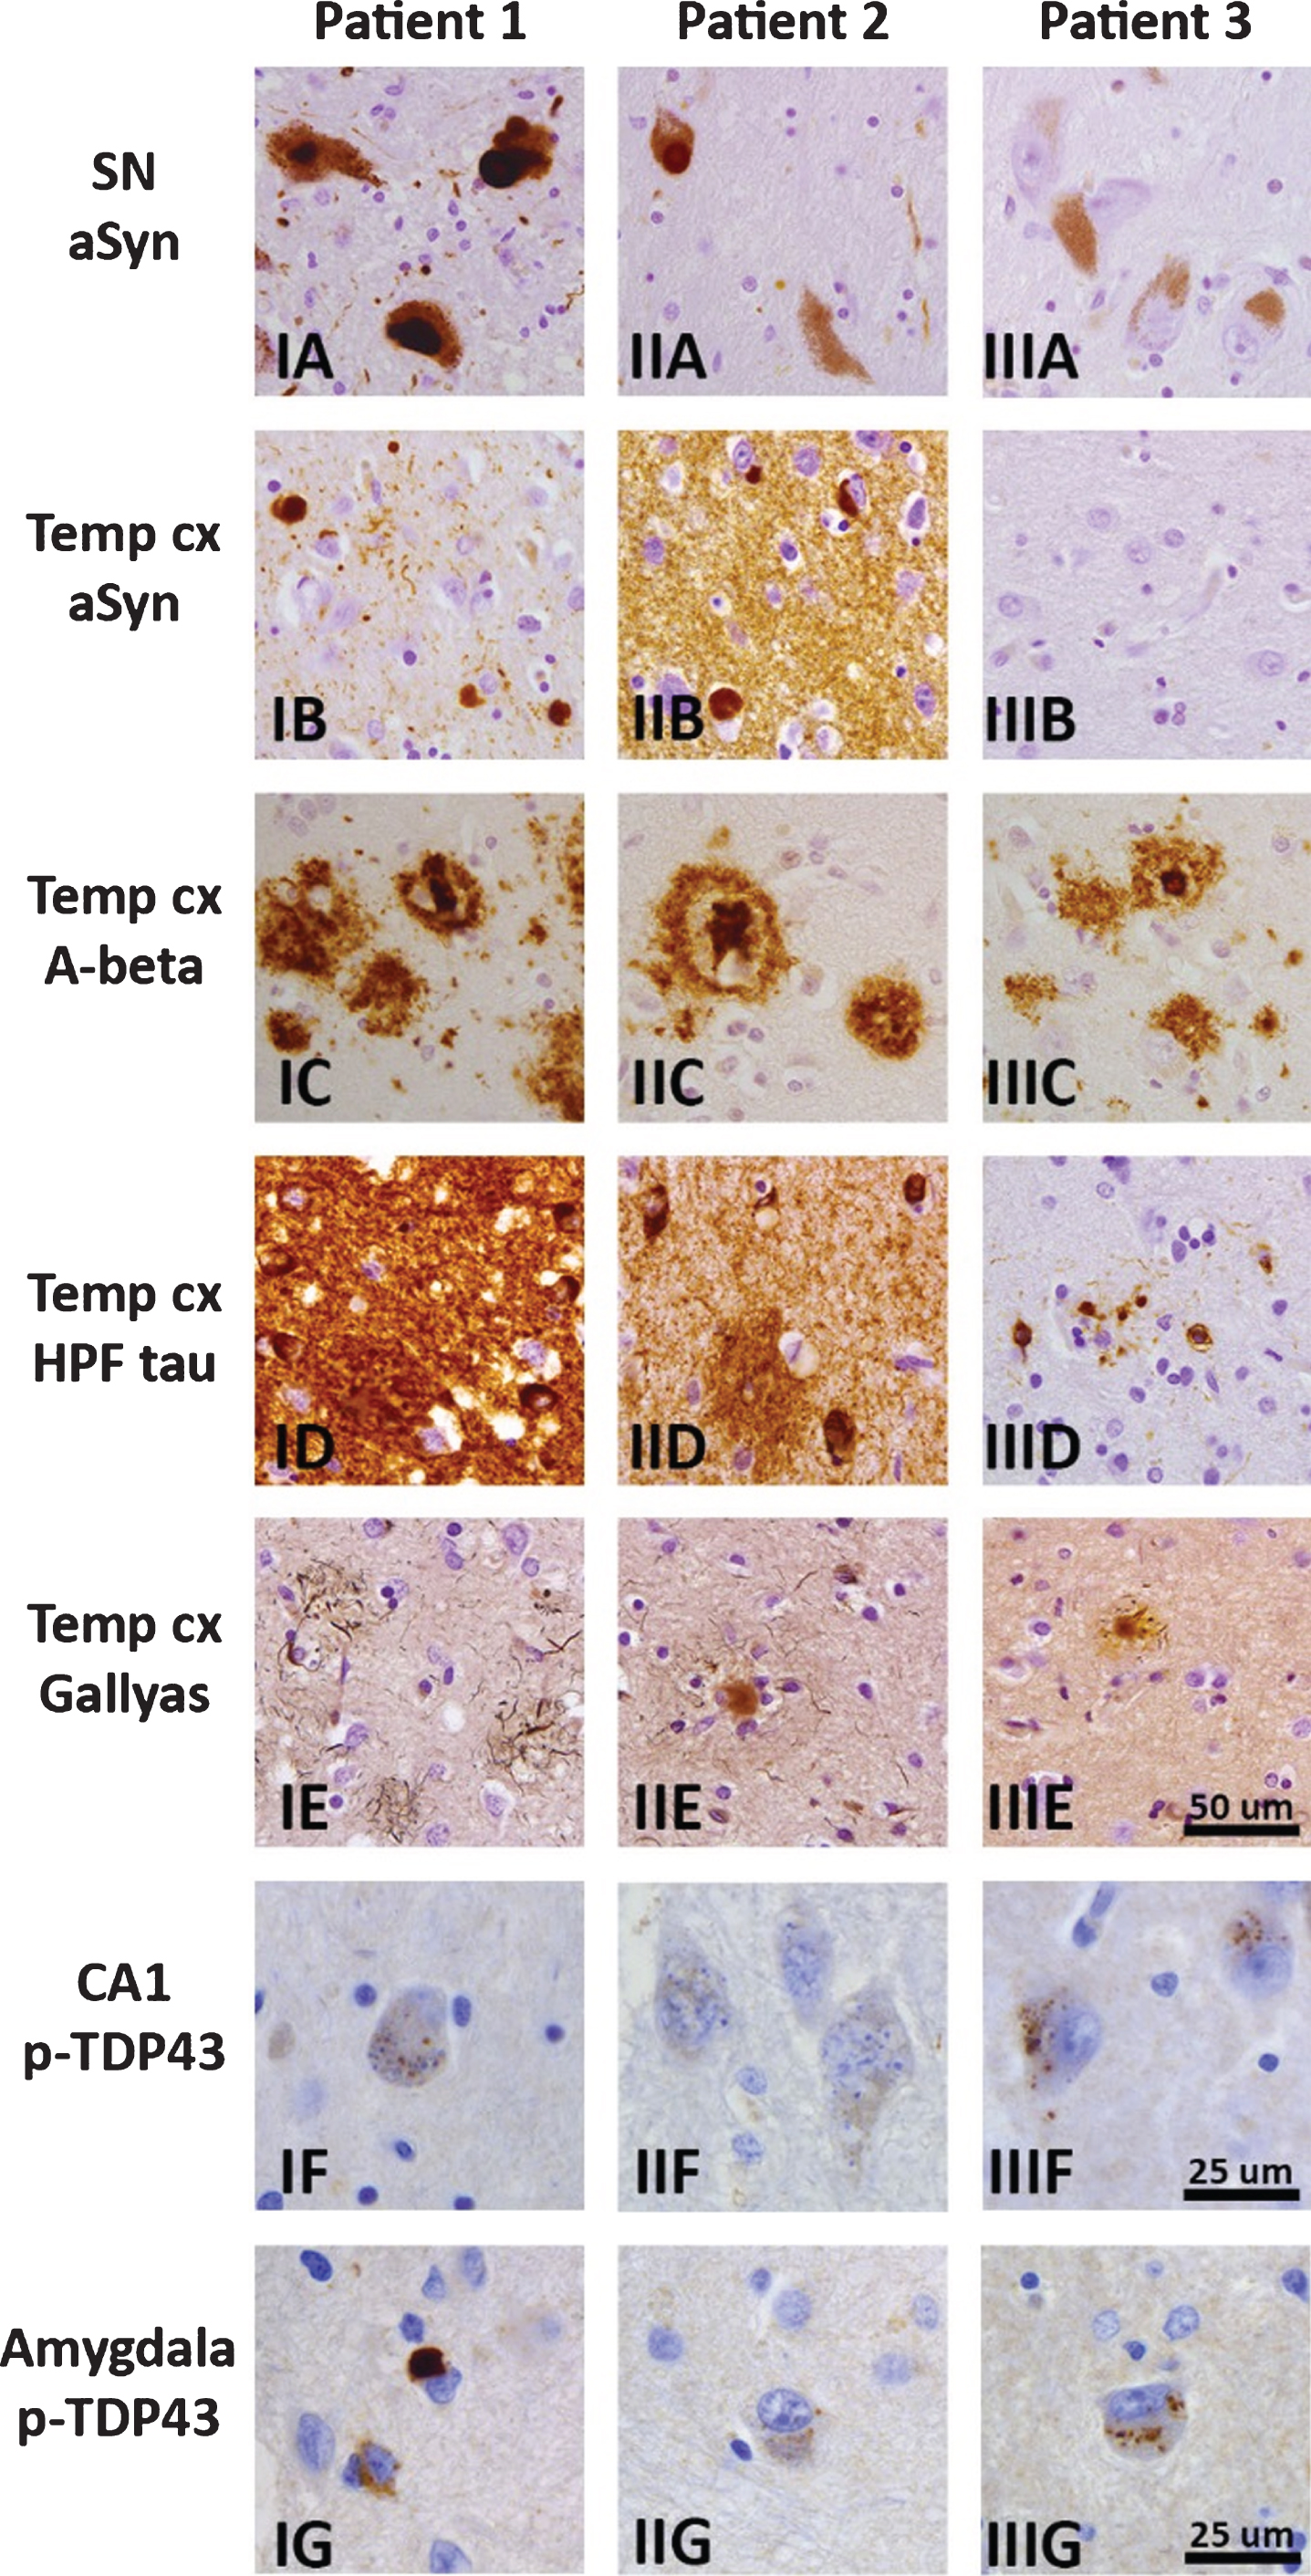 Brain pathology in three patients with possibly pathogenic LRP10 variants, with representative photomicrographs of selected brain regions for Patient 1 (IA–G), Patient 2 (IIA–G), and Patient 3 (IIIA–G). Immunohistochemistry for α-synuclein (clone KM51) showed Lewy bodies and Lewy neurites in brainstem, limbic and neocortical brain areas in Patients 1 and 2 (I–IIA, B), but no α-synuclein immunoreactivity in Patient 3 (IIIA, B). Diffuse and cored amyloid-β plaques (clone 6F/3D) were present in neocortical regions, amygdala, and striatum in all three patients, and extended into the CA4 region, midbrain, and cerebellum in Patients 1 and 3. Amyloid-β positive plaques in the temporal pole are shown in panel I–IIIC. Immunostaining for hyperphosphorylated tau (clone AT8) showed neurofibrillary tangles, threads, and plaques in the hippocampus and temporal pole in all three patients, and extended into the peristriate and striate areas of the occipital cortex in Patient 1. A moderate or high load of neurofibrillary pathology was present in the temporal pole in Patient 3 (IIID), and Patients 1 and 2 (I–IID), respectively. Gallyas silver stain showed a moderate or high load of neuritic plaques in neocortical regions in Patients 2 and 3 (IIE, IIIE), and Patient 1(IE), respectively. Immunostaining for phospho-TDP43 (polyclonal rabbit antibody) showed granulovacuolar degeneration in the hippocampus and amygdala of all three patients (I–IIIF, II–IIIG). Additionally, Patient 1 showed TDP-43-positive neuronal inclusions and threads in the amygdala fitting limbic-predominant age-related TDP-43 encephalopathy (LATE; IG). Scalebar in IIIE represents 50μm and applies to panels A–E. Scalebars in IIIF and IIIG represent 25μm and apply to panels I–IIIF-G. SN, substantia nigra, Temp cx, temporal pole.